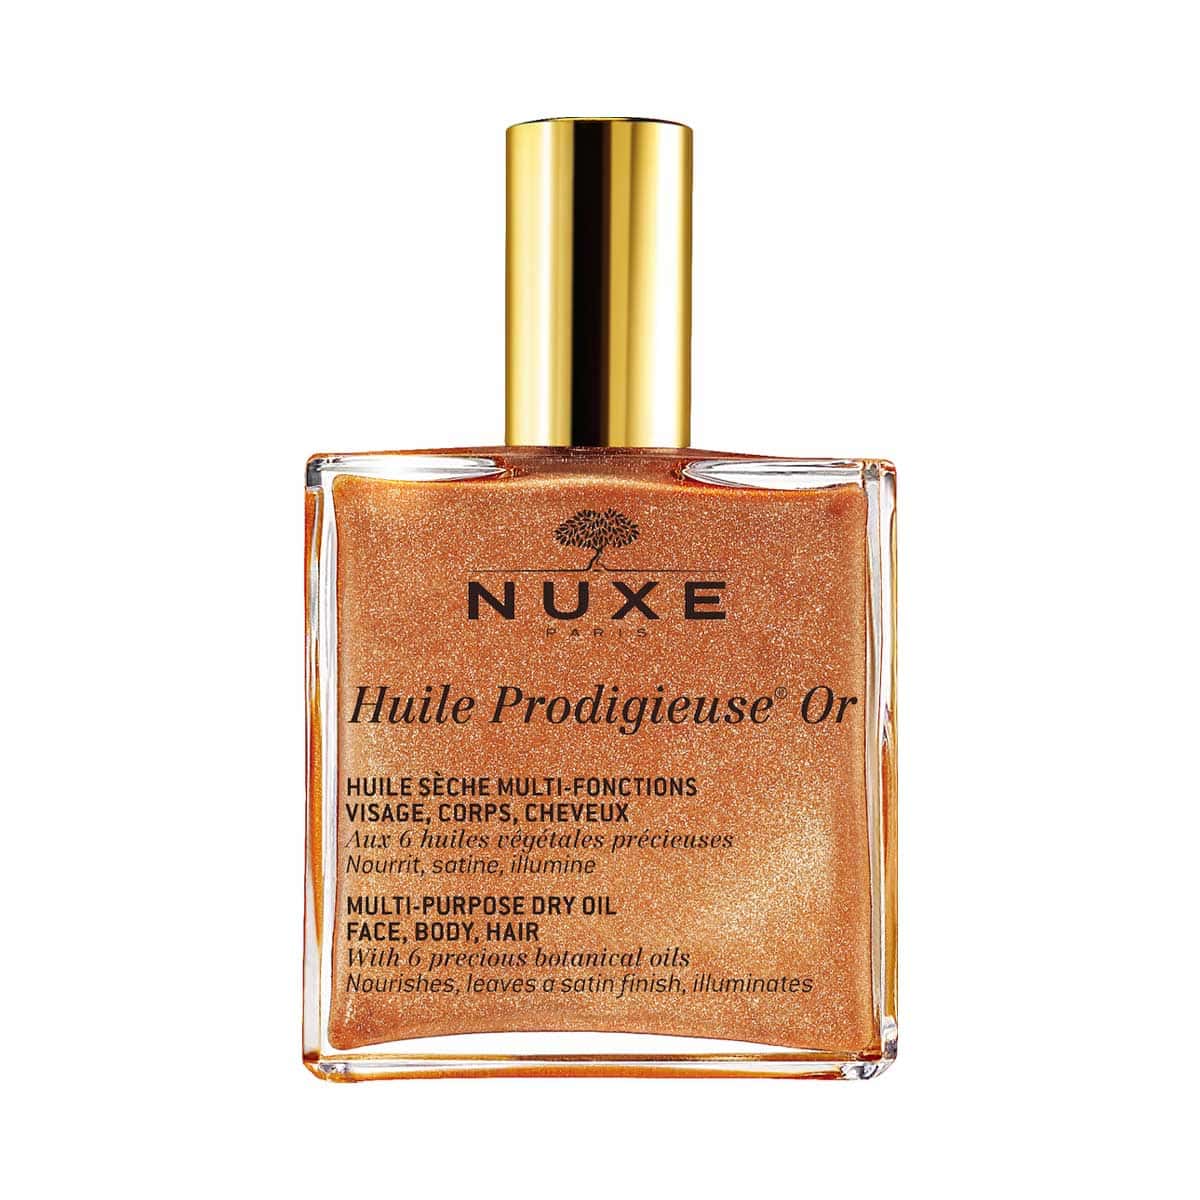 Nuxe-Huile-Prodigieuse-Or-Shimmering-Multi-Purpose-Dry-Oil-Face-Body-Hair-100-ml-3264680009778